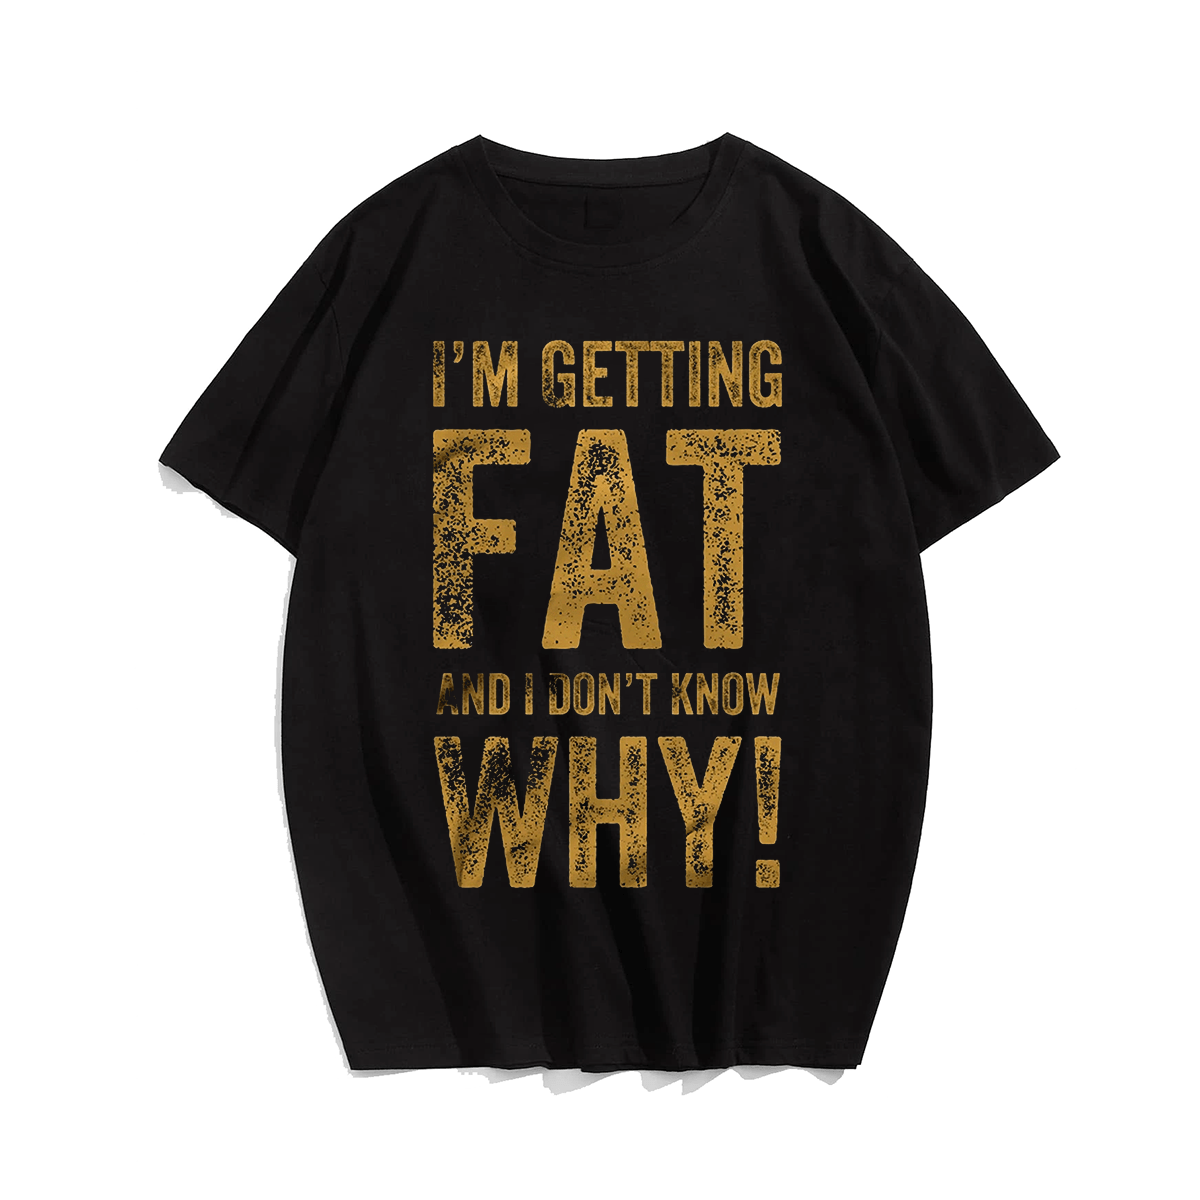 I'm Getting Fat And I Don't Know Why! T-shirt for Men, Oversize Plus Size Big & Tall Man Clothing